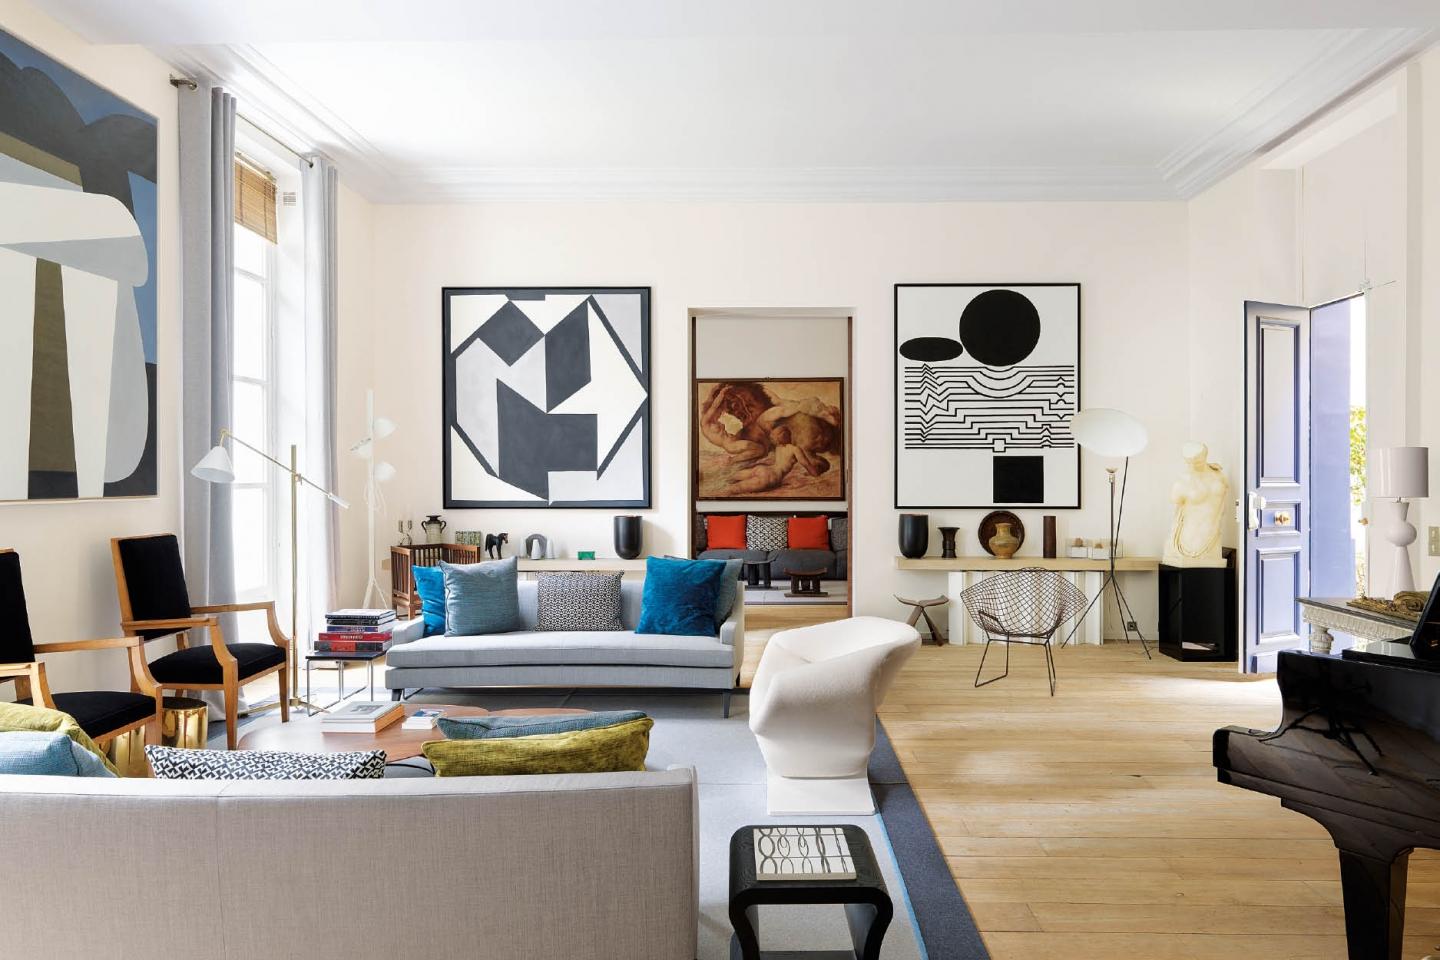 Chairs and cushions add pops of colour in the living room, but the focus is squarely on the artworks; the grand piano is reminiscent of Didier Gomez's musical study. Gomez endeavored to introduce more vivid colours into his home's new design